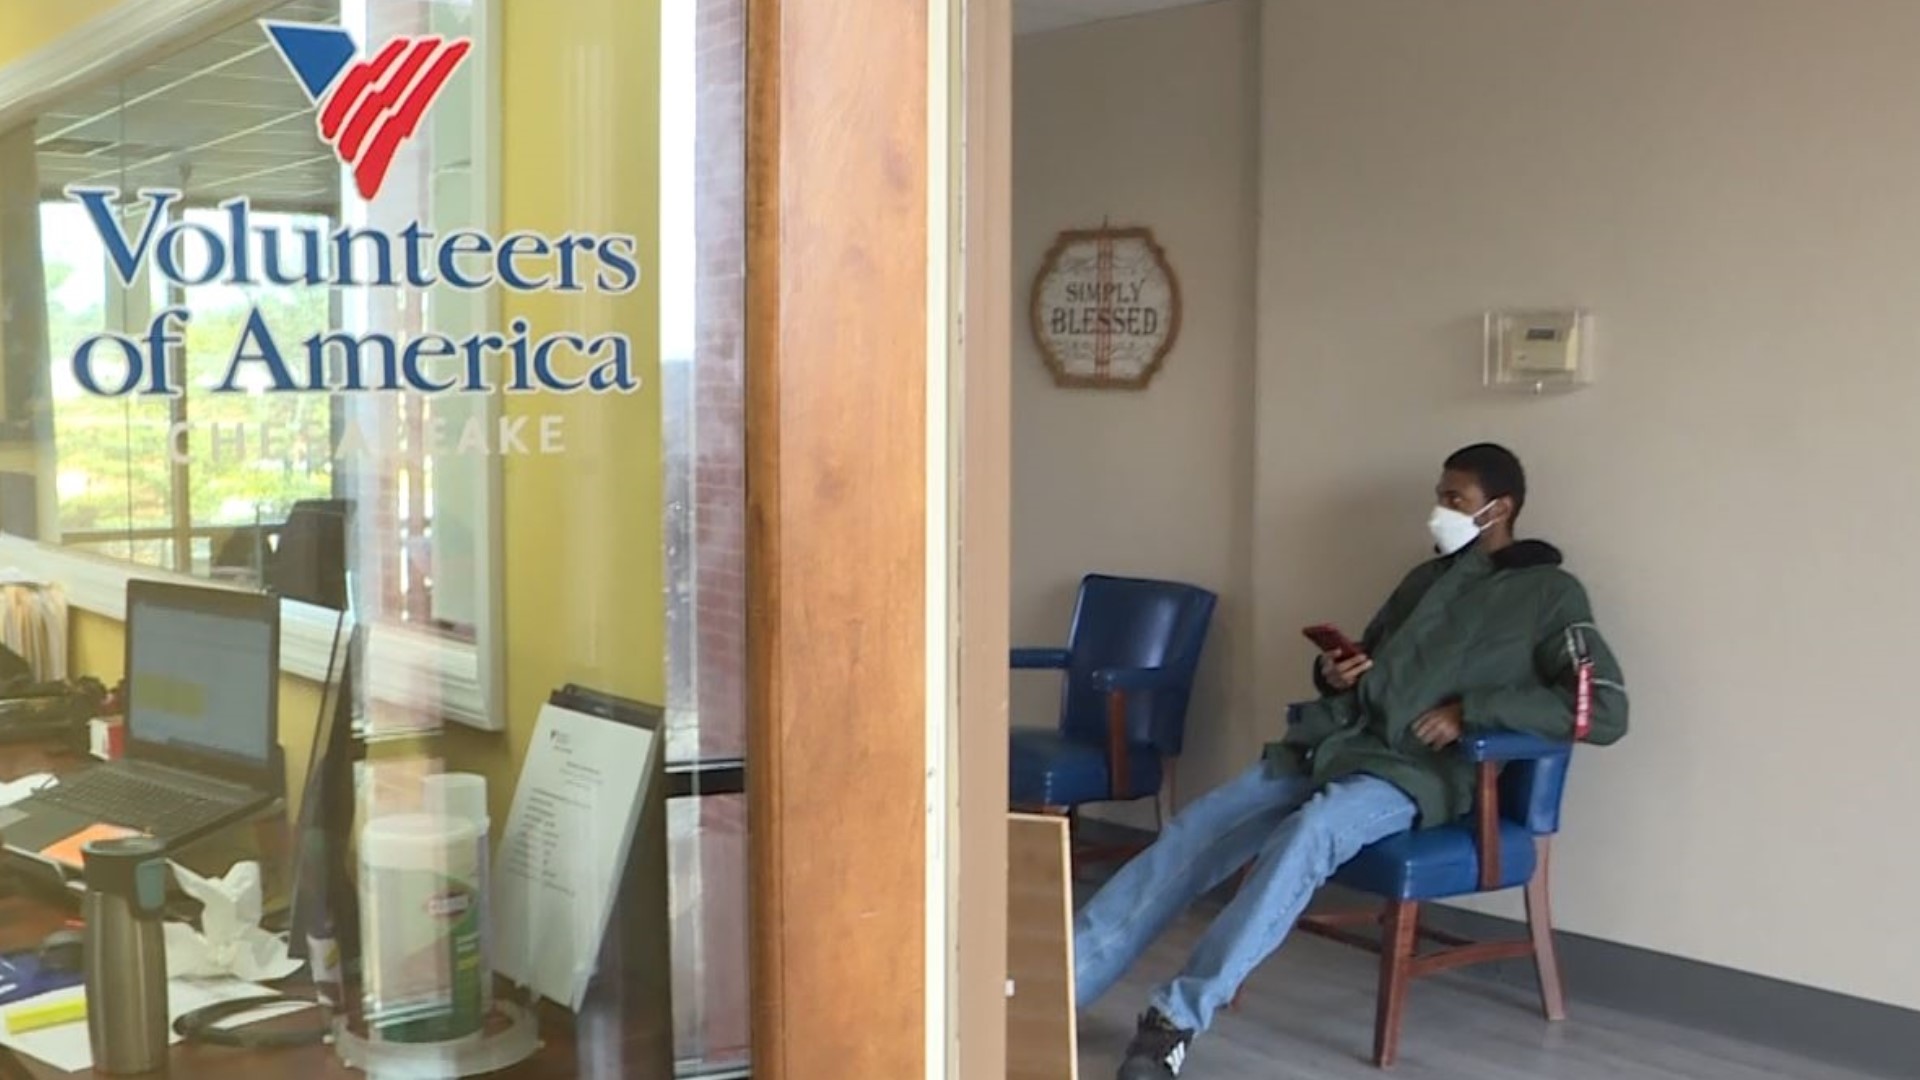 Volunteers of America's Hope Center in Greenbelt wants to help the community address mental health issues.